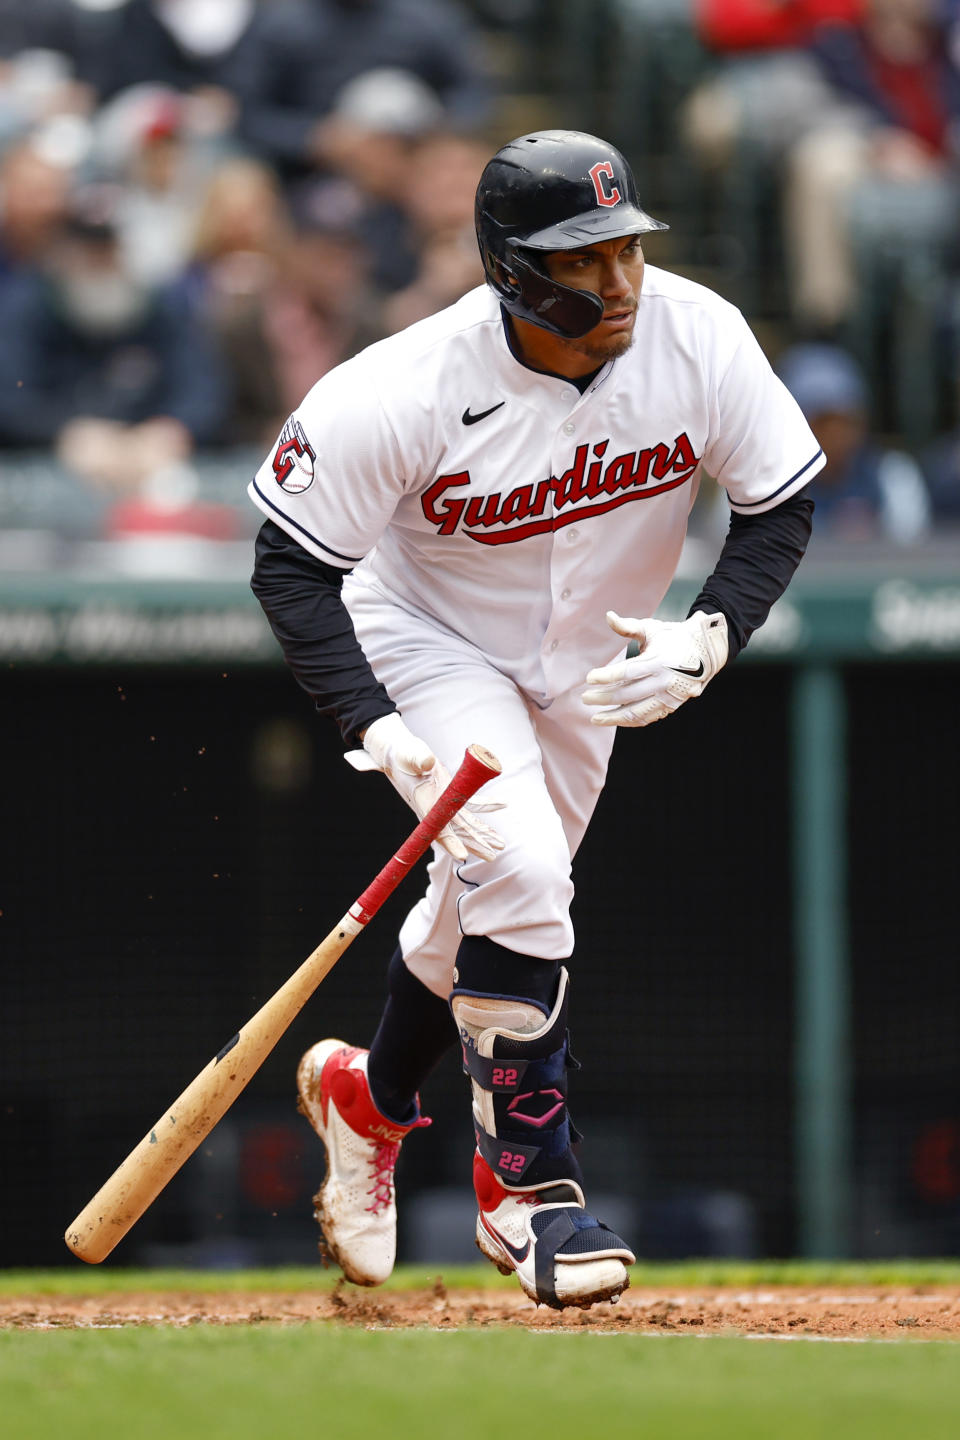 Cleveland Guardians' Josh Naylor hits a two run single against the San Diego Padres during the fifth inning in the first baseball game of a doubleheader, Wednesday, May 4, 2022, in Cleveland. (AP Photo/Ron Schwane)